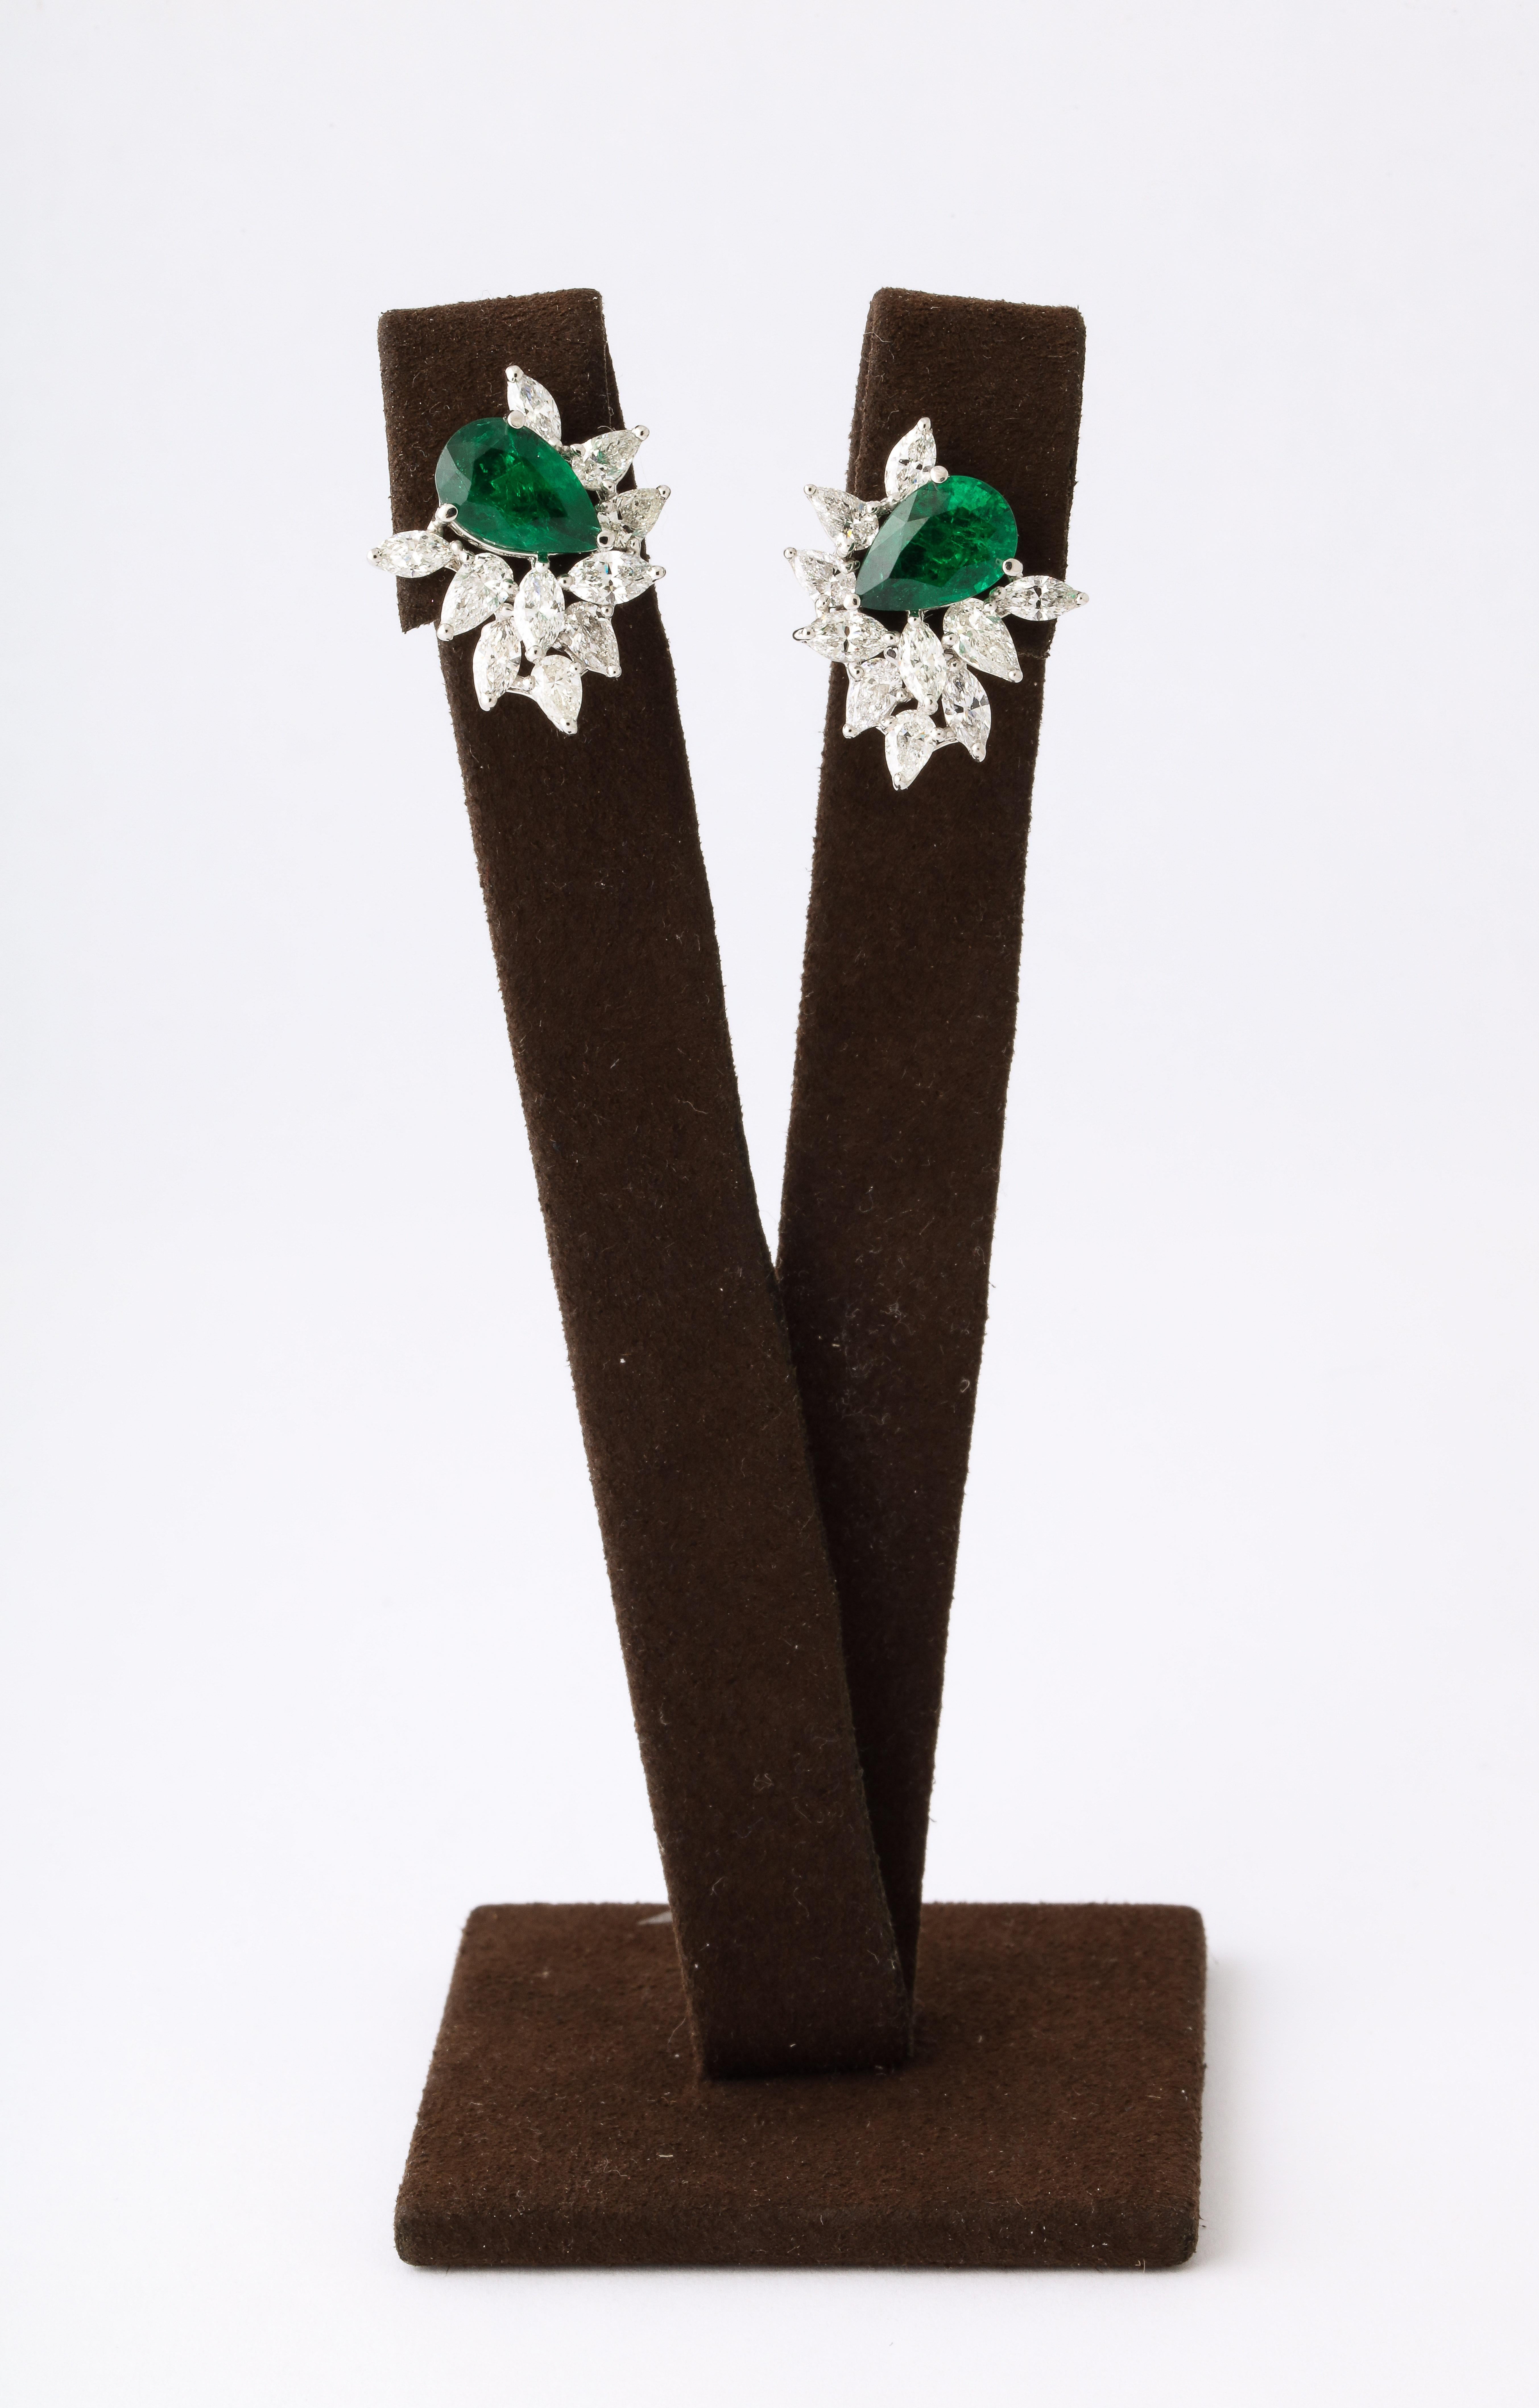 
A fashionable pair of emerald and diamond earrings. 

4.95 carats of certified “VIVID GREEN”Emeralds. 

4.21 carats of white pear and marquise shape diamonds. 

Set in 18k white gold. 

Just under 3/4 of an inch wide and tall, approximately. 

A